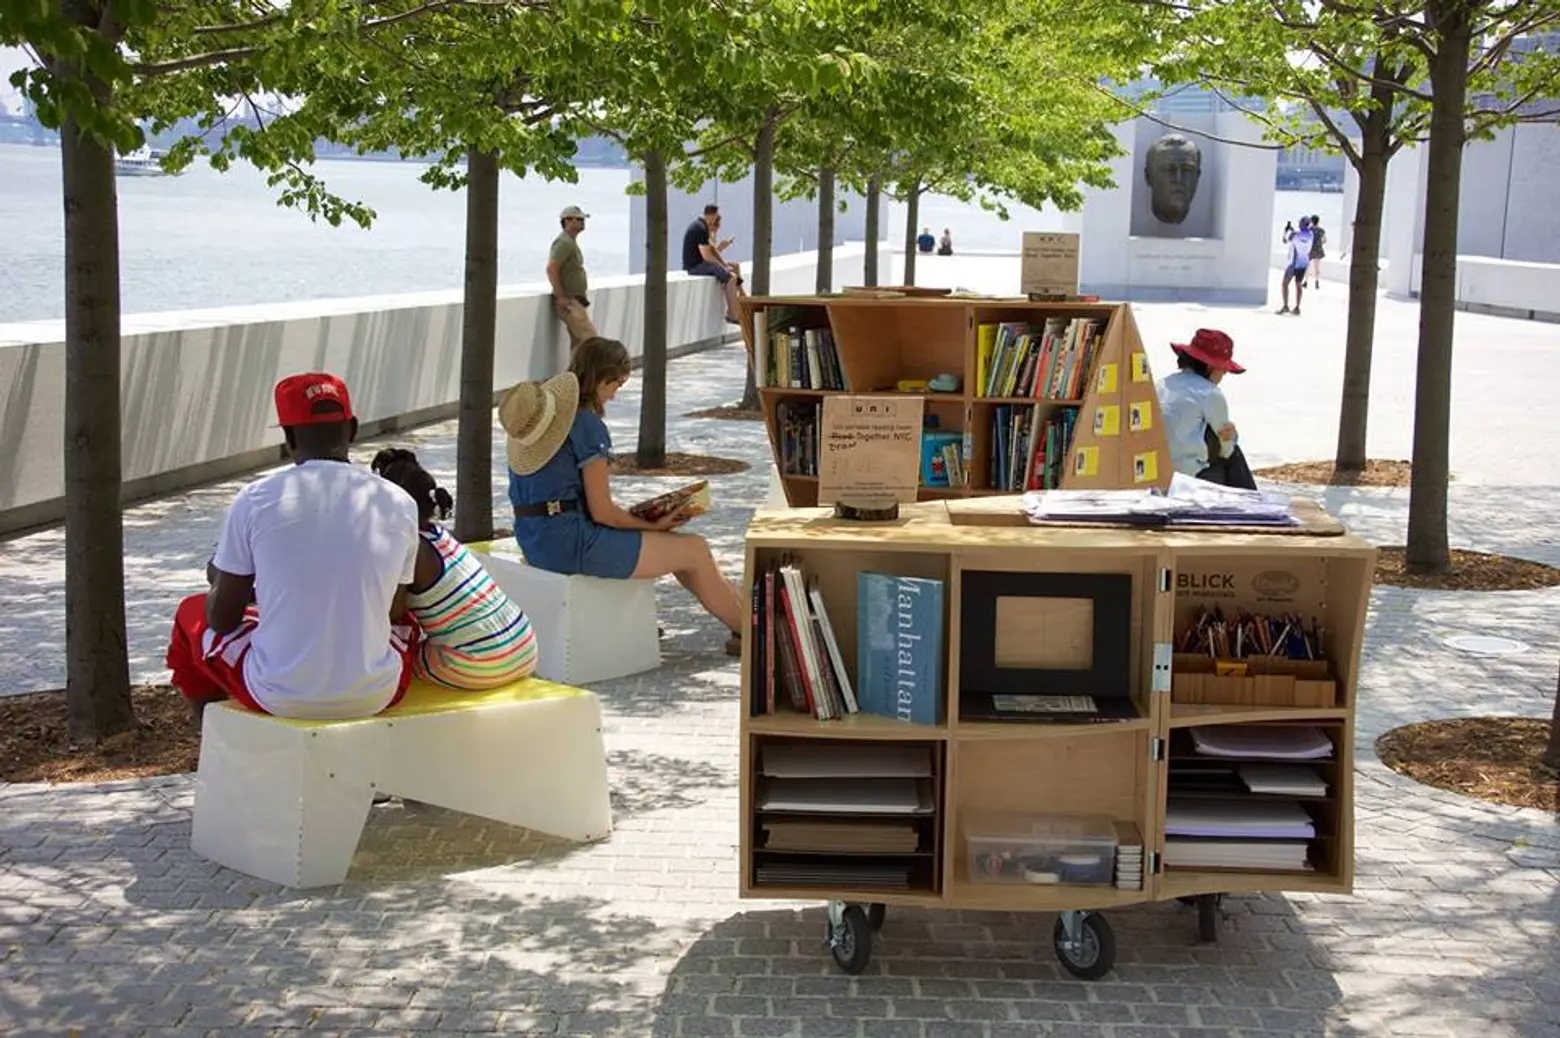 four freedoms park, pop up library, archtober, events